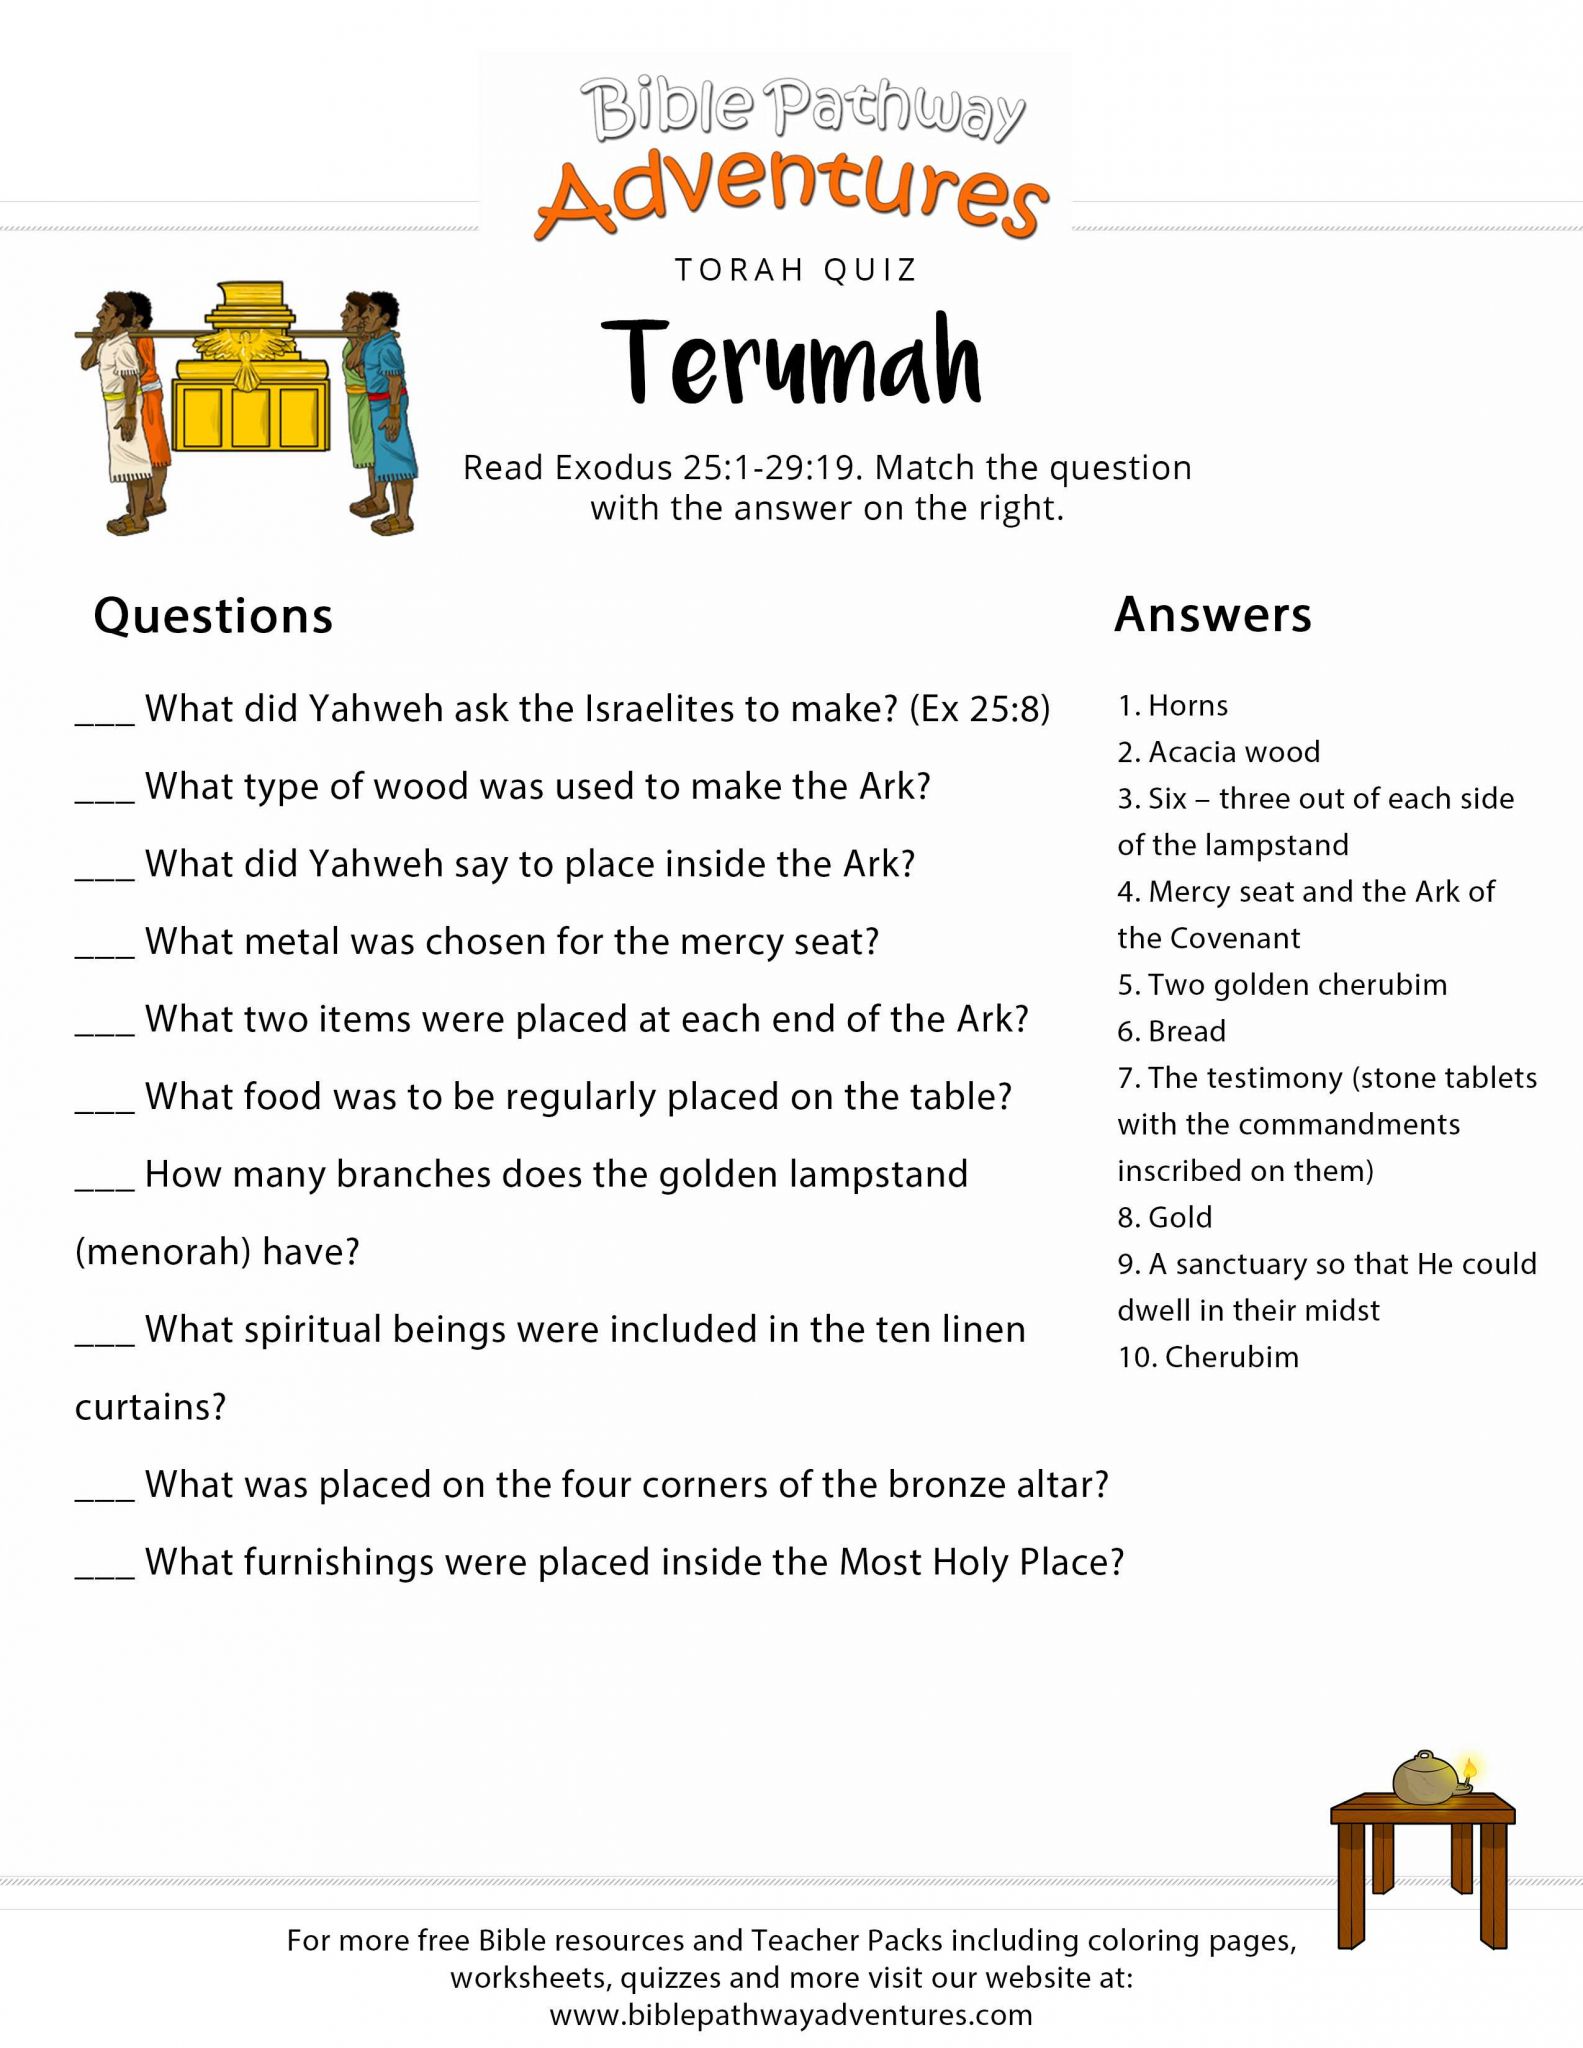 David and Goliath Worksheets as Well as torah Portion Quiz Te Exodus 25 1 29 19 Pinterest